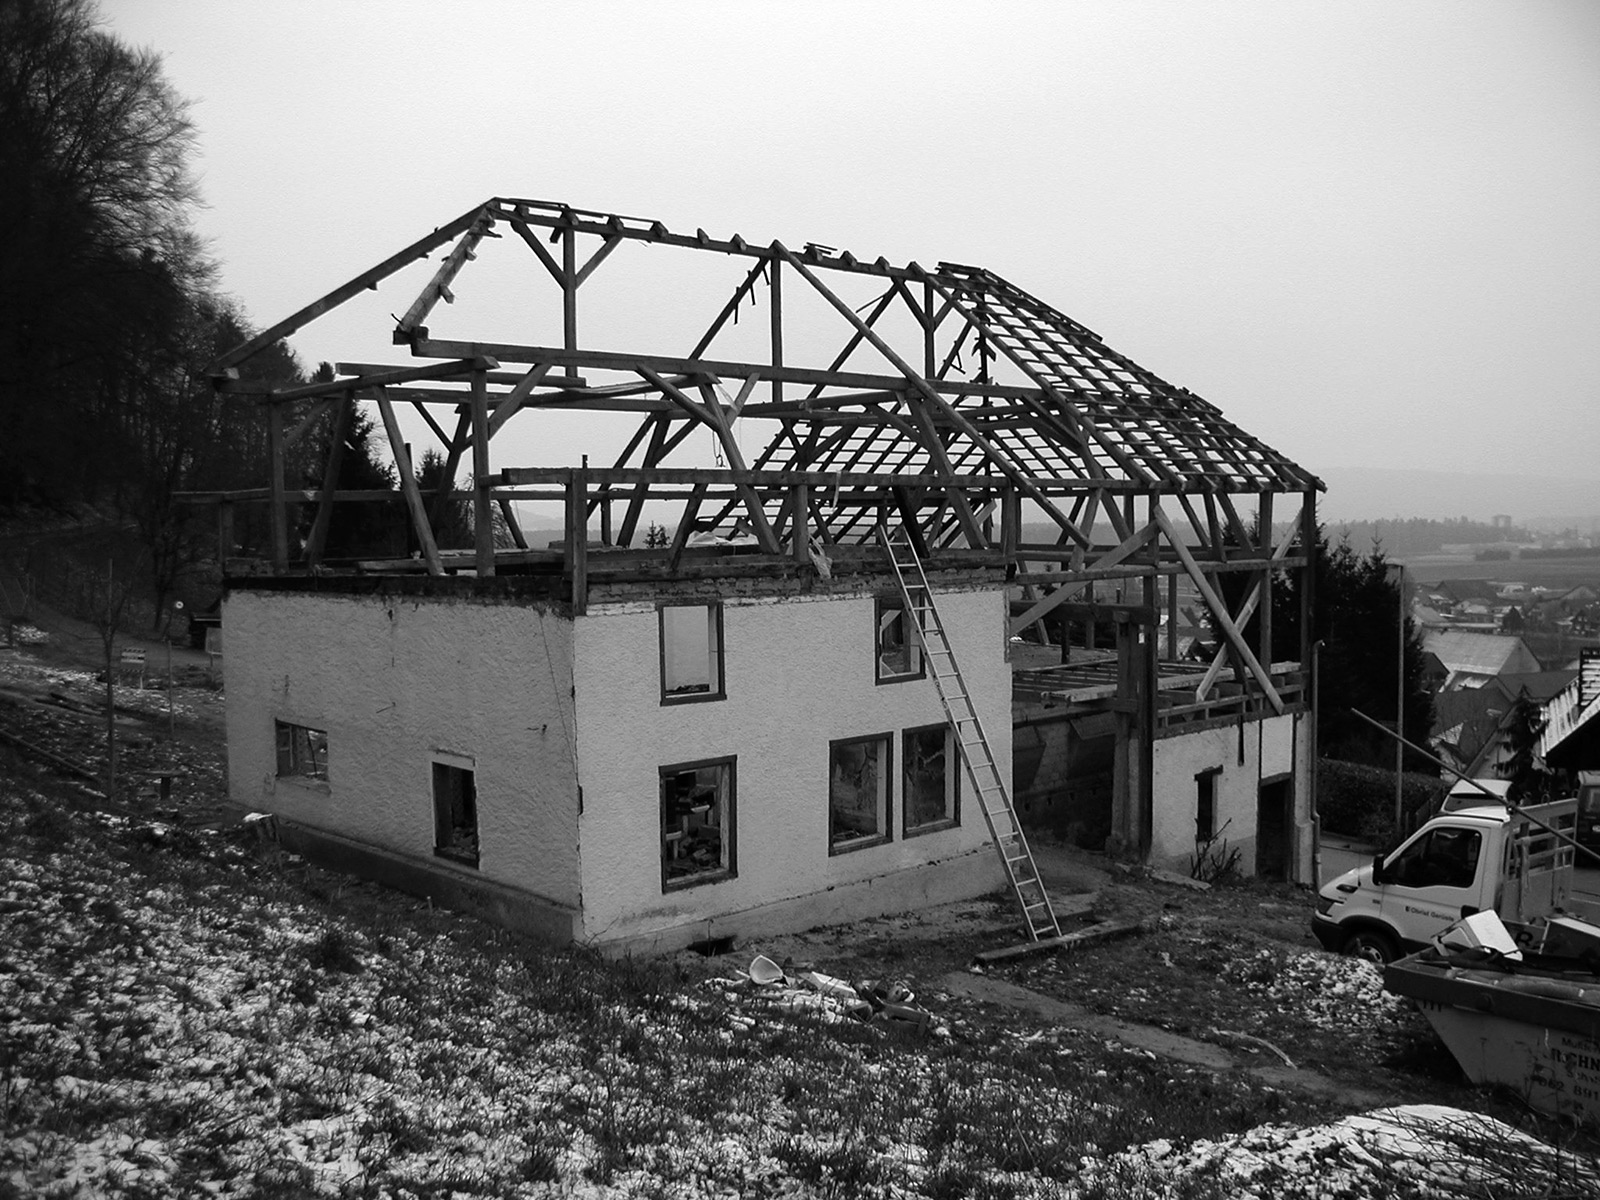 The grown house, demolition